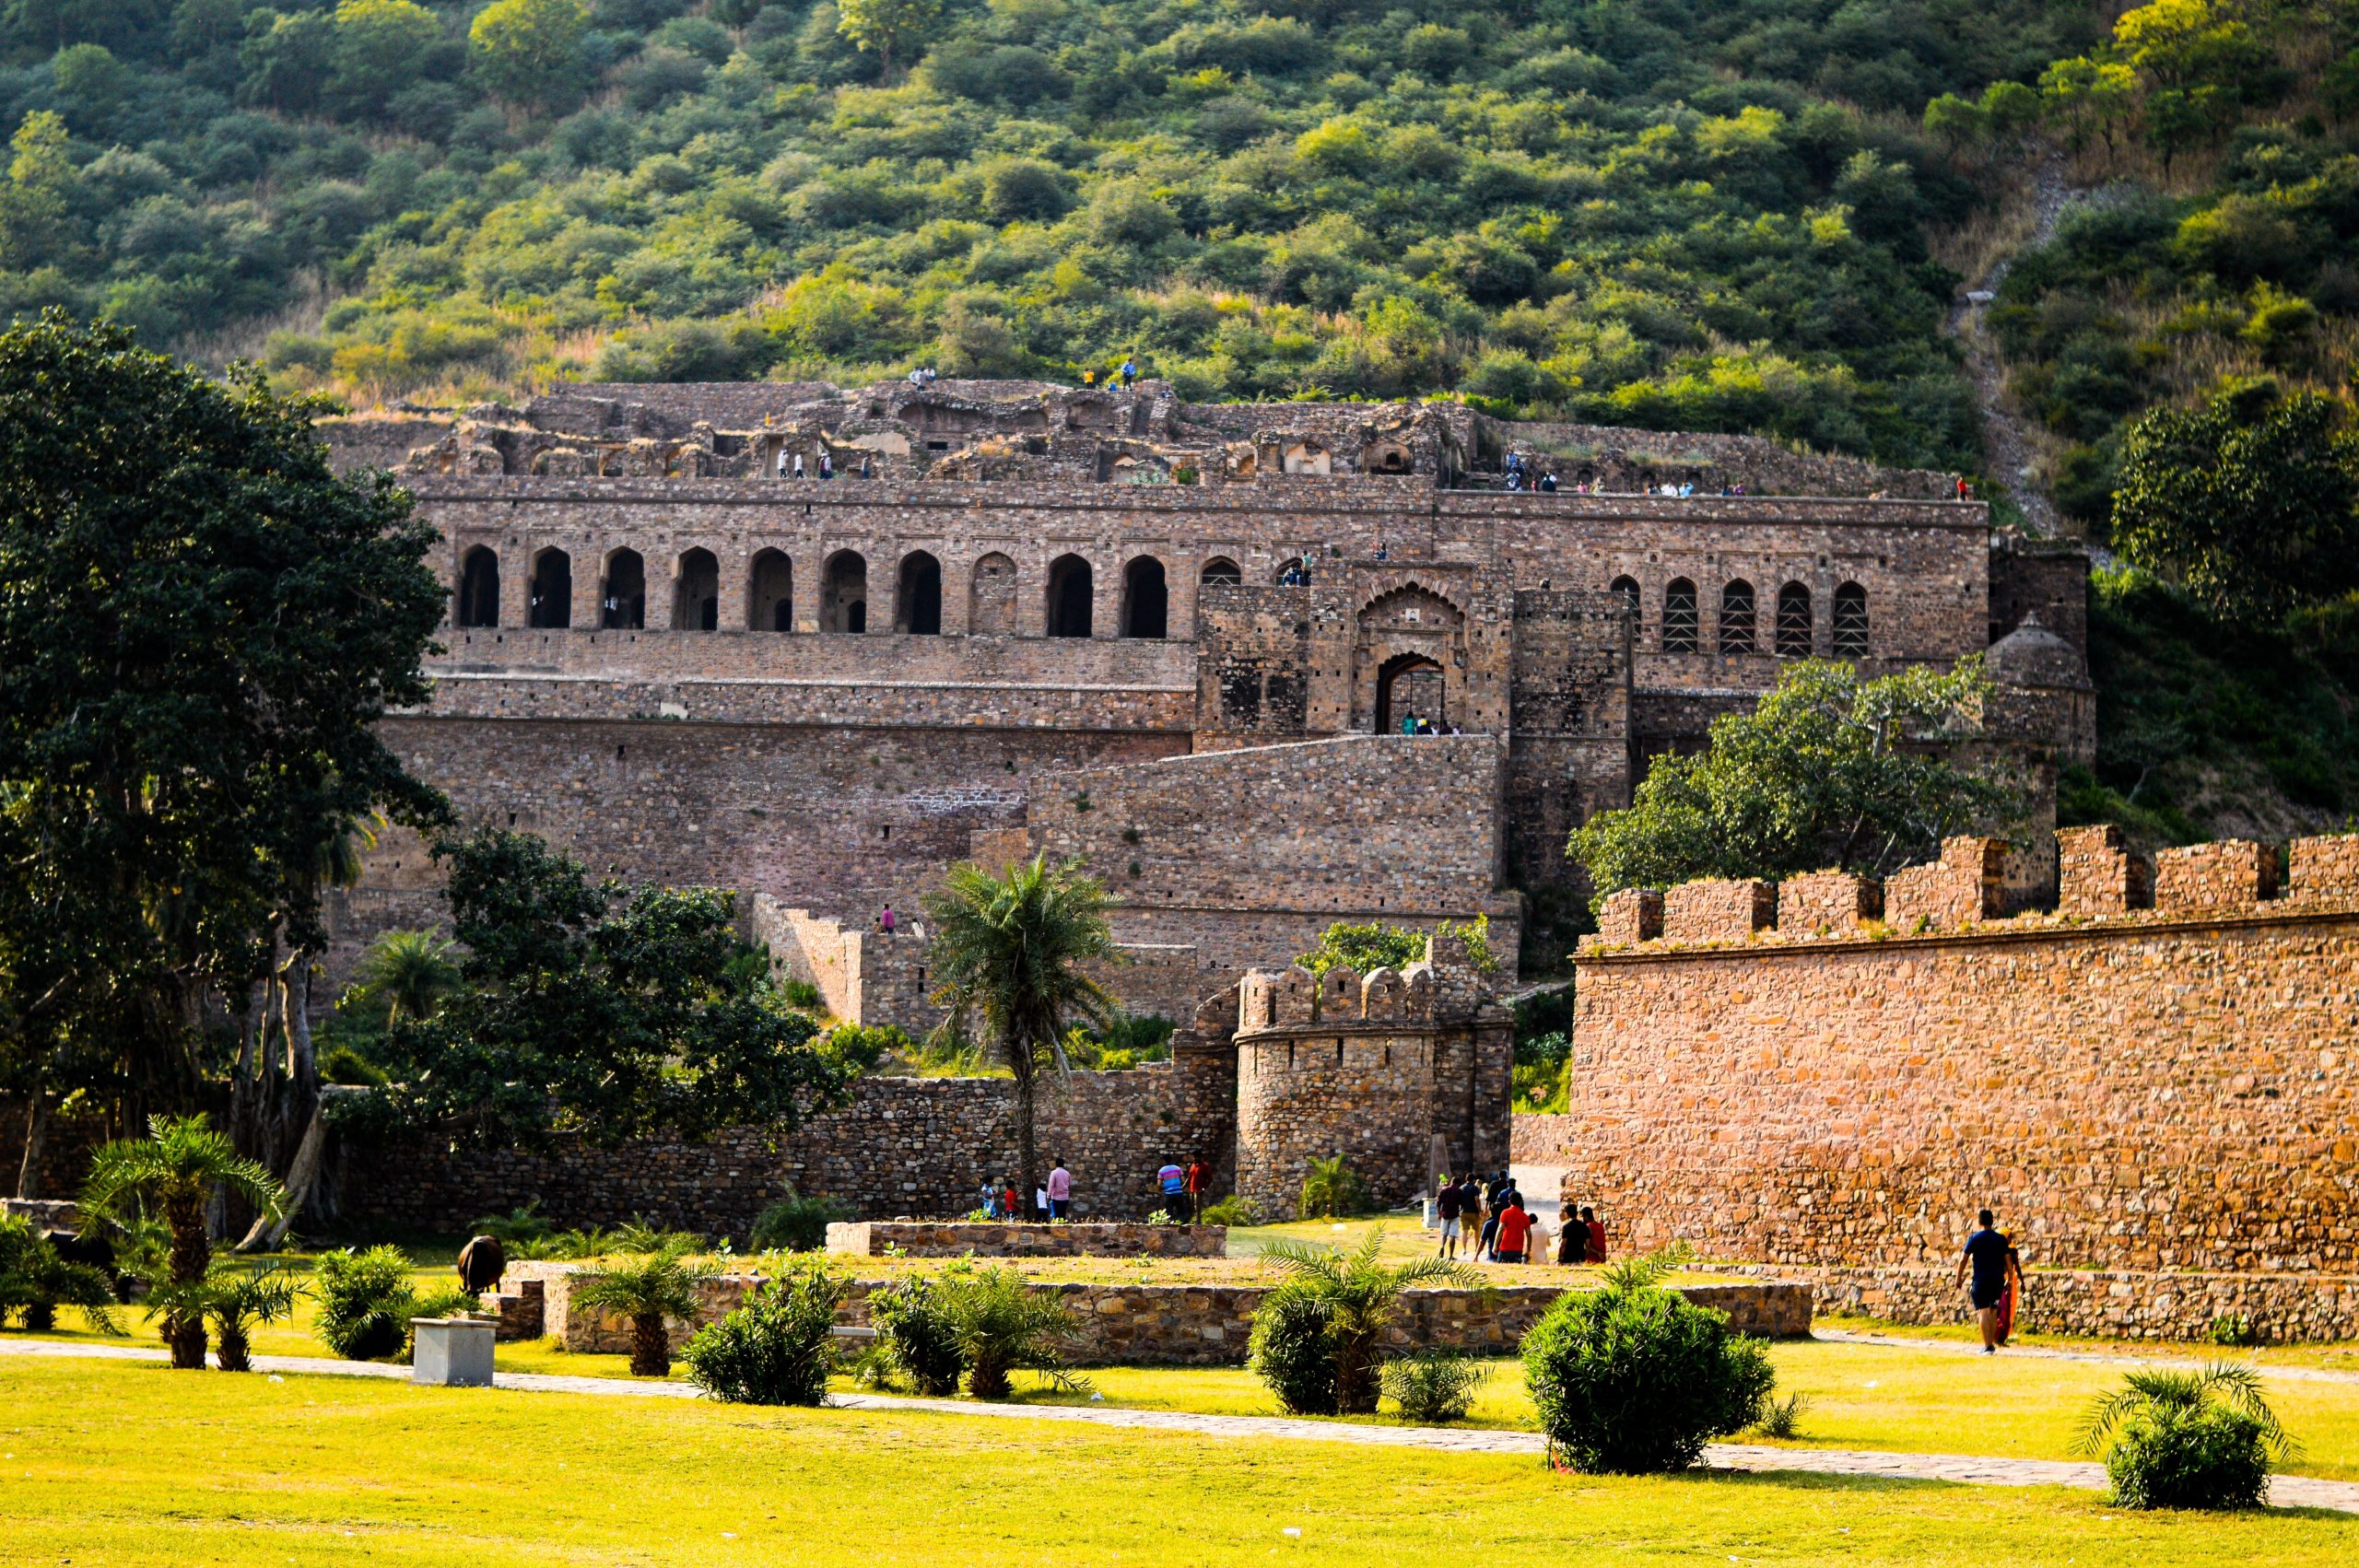 Trip to the haunted Bhangarh fort